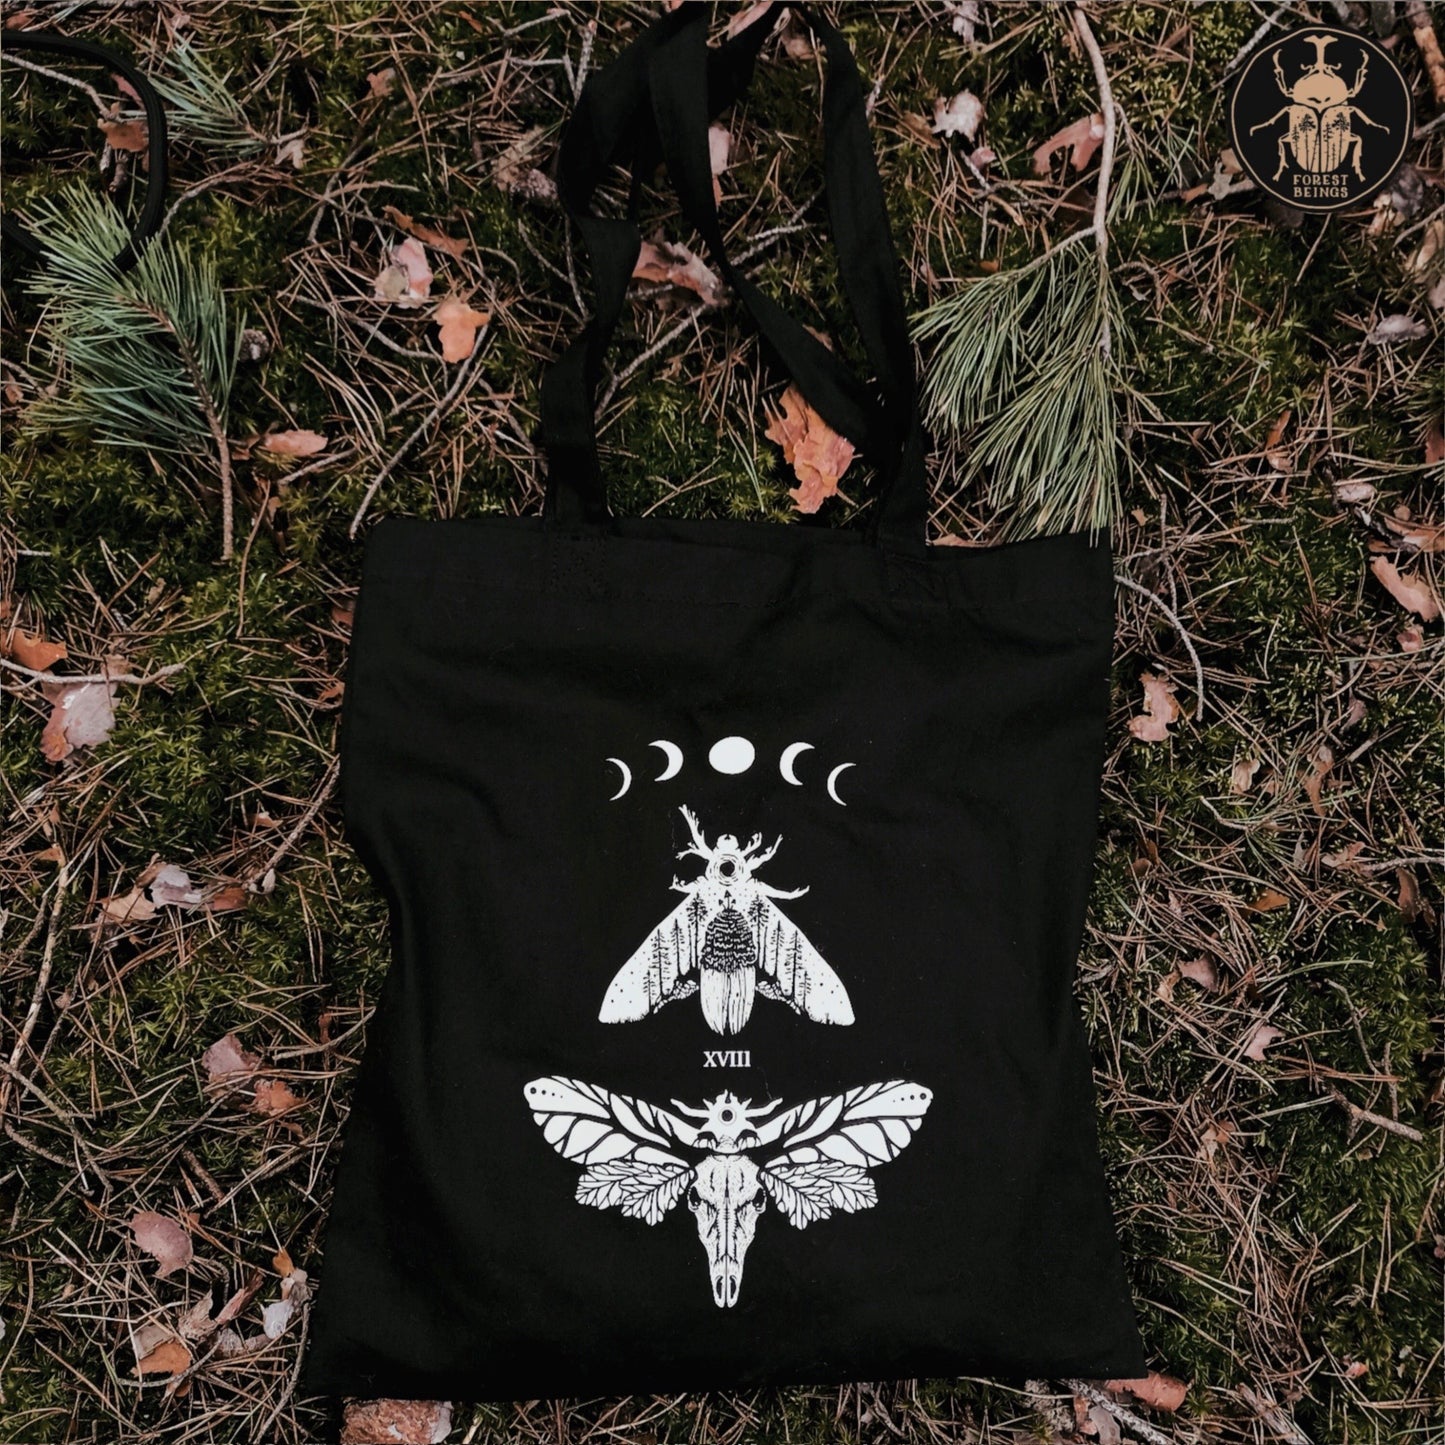 A gothic tote bag laying on the ground in the forest.